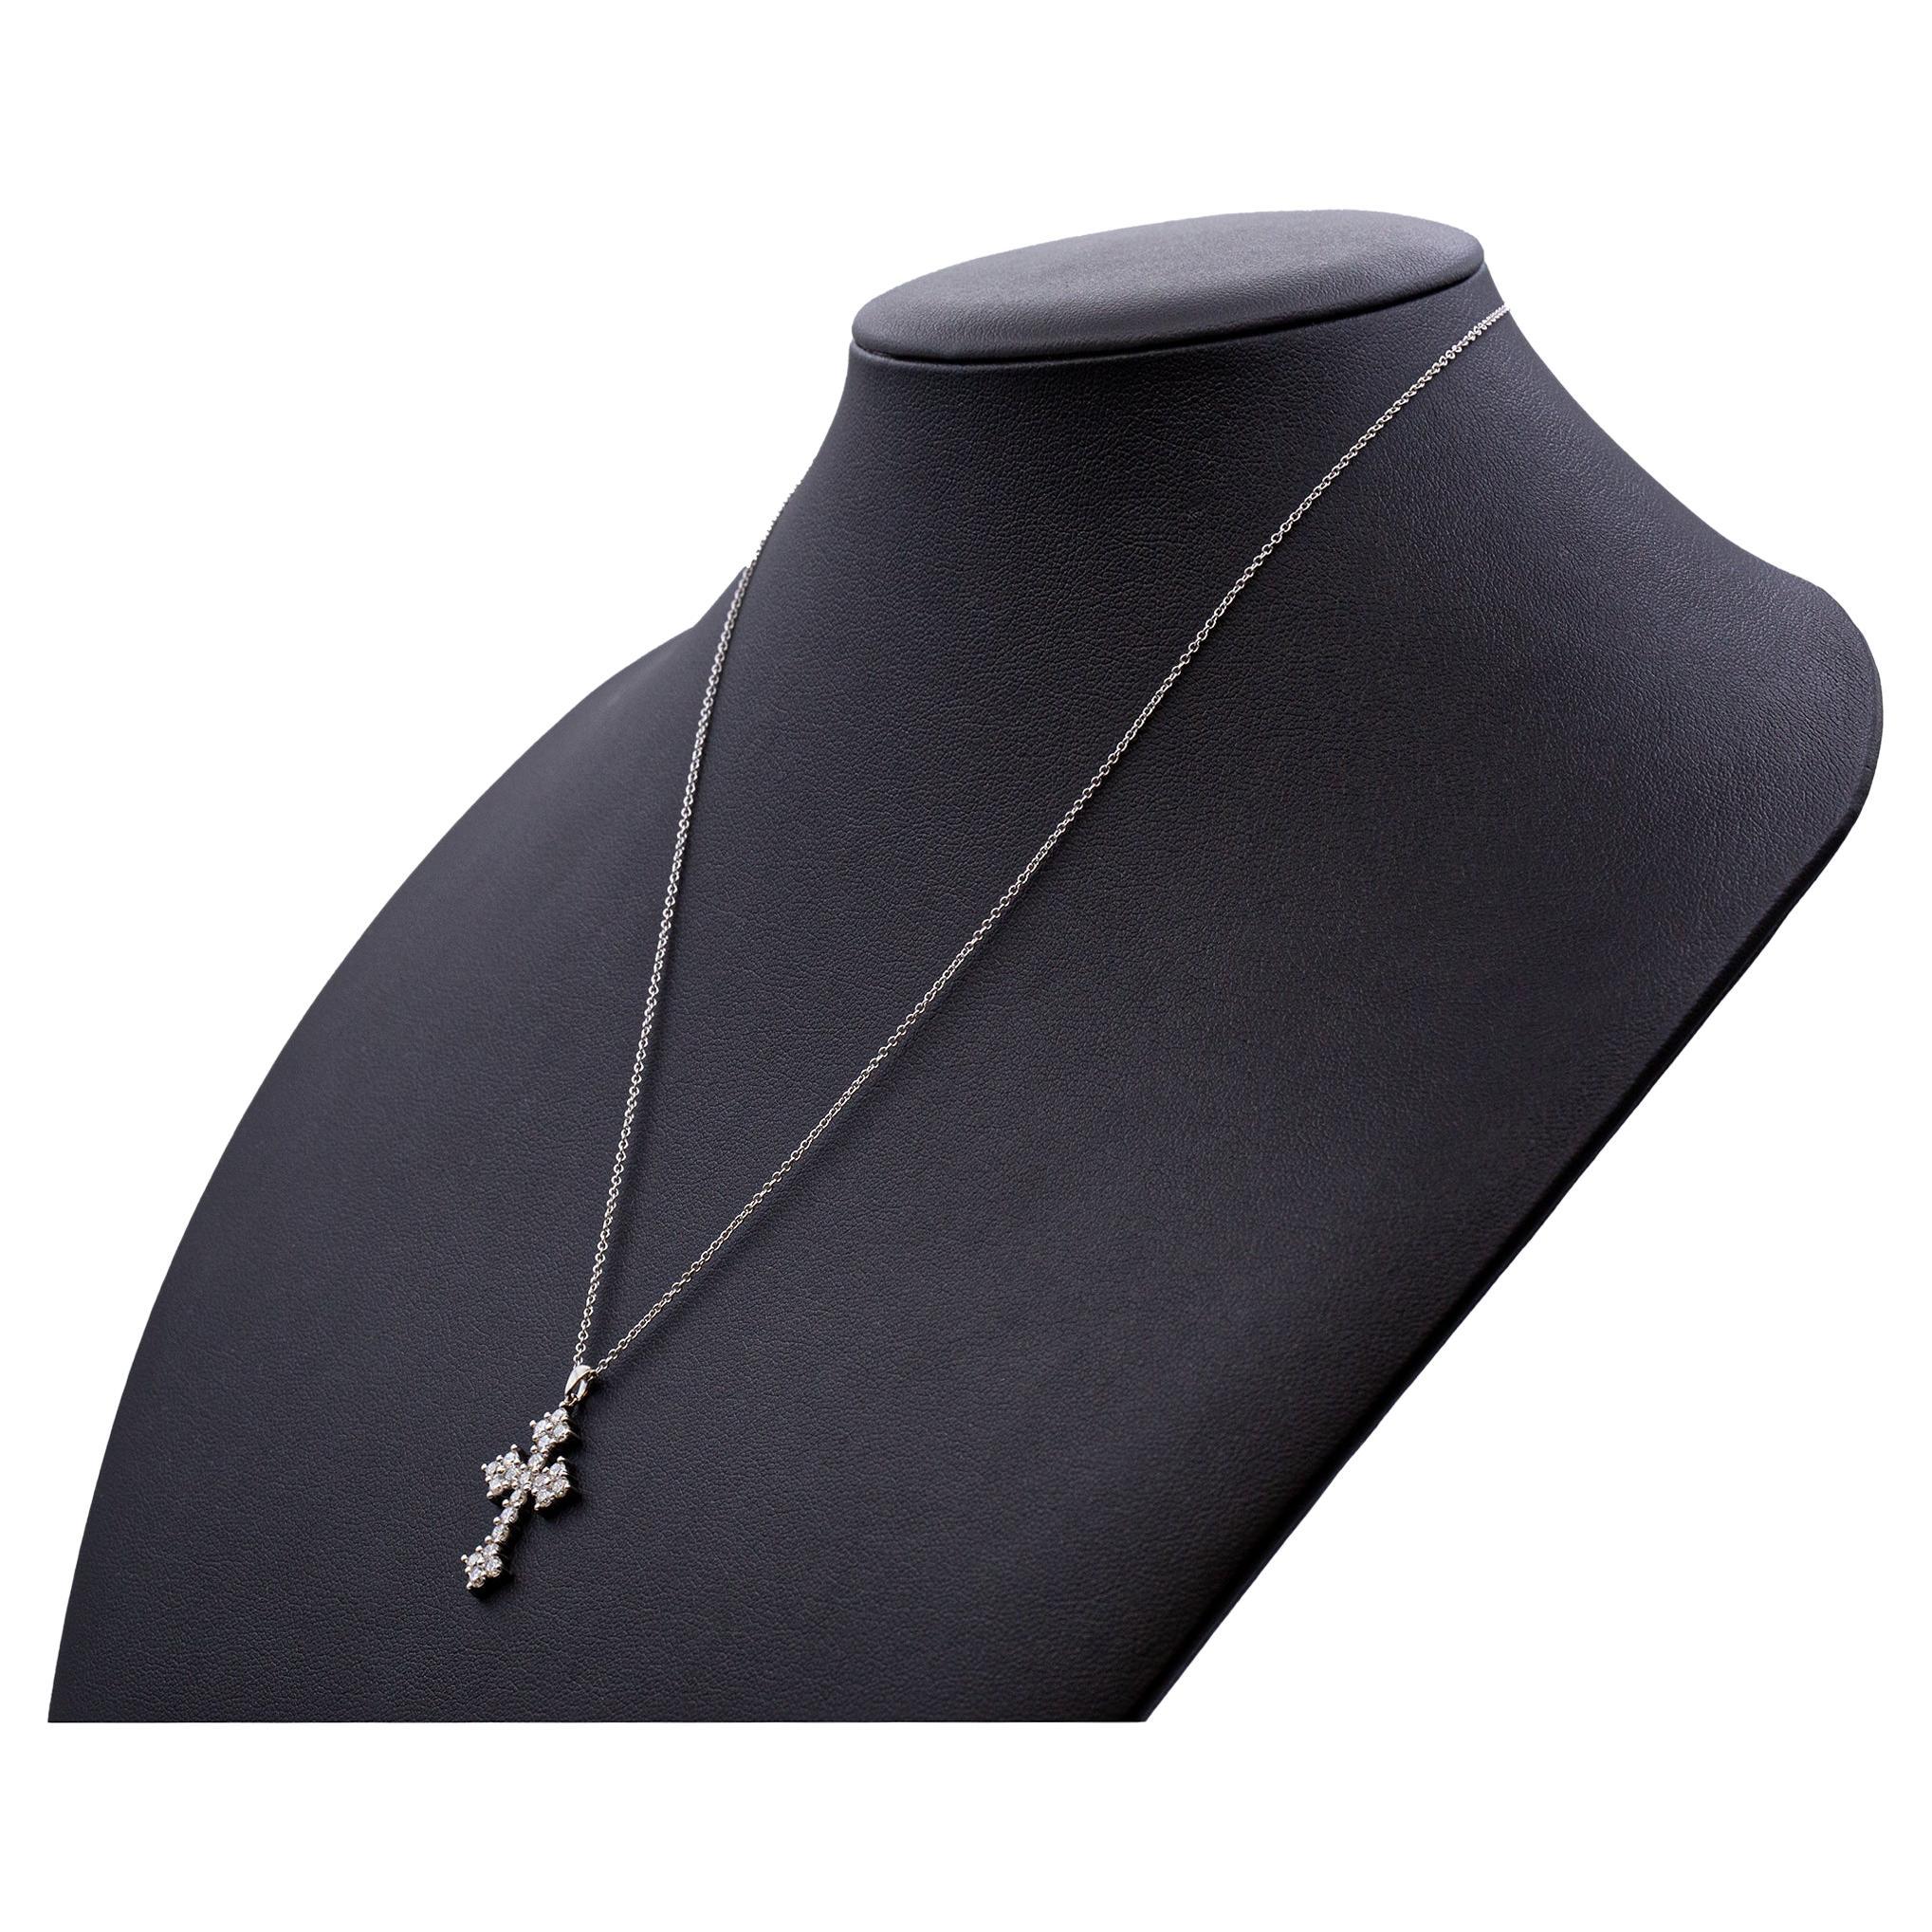 Diamond Cross Necklace in 14K White Gold
on 16'' chain
total carat weight is 0.90ct F/G color and VS clarity natural diamonds
